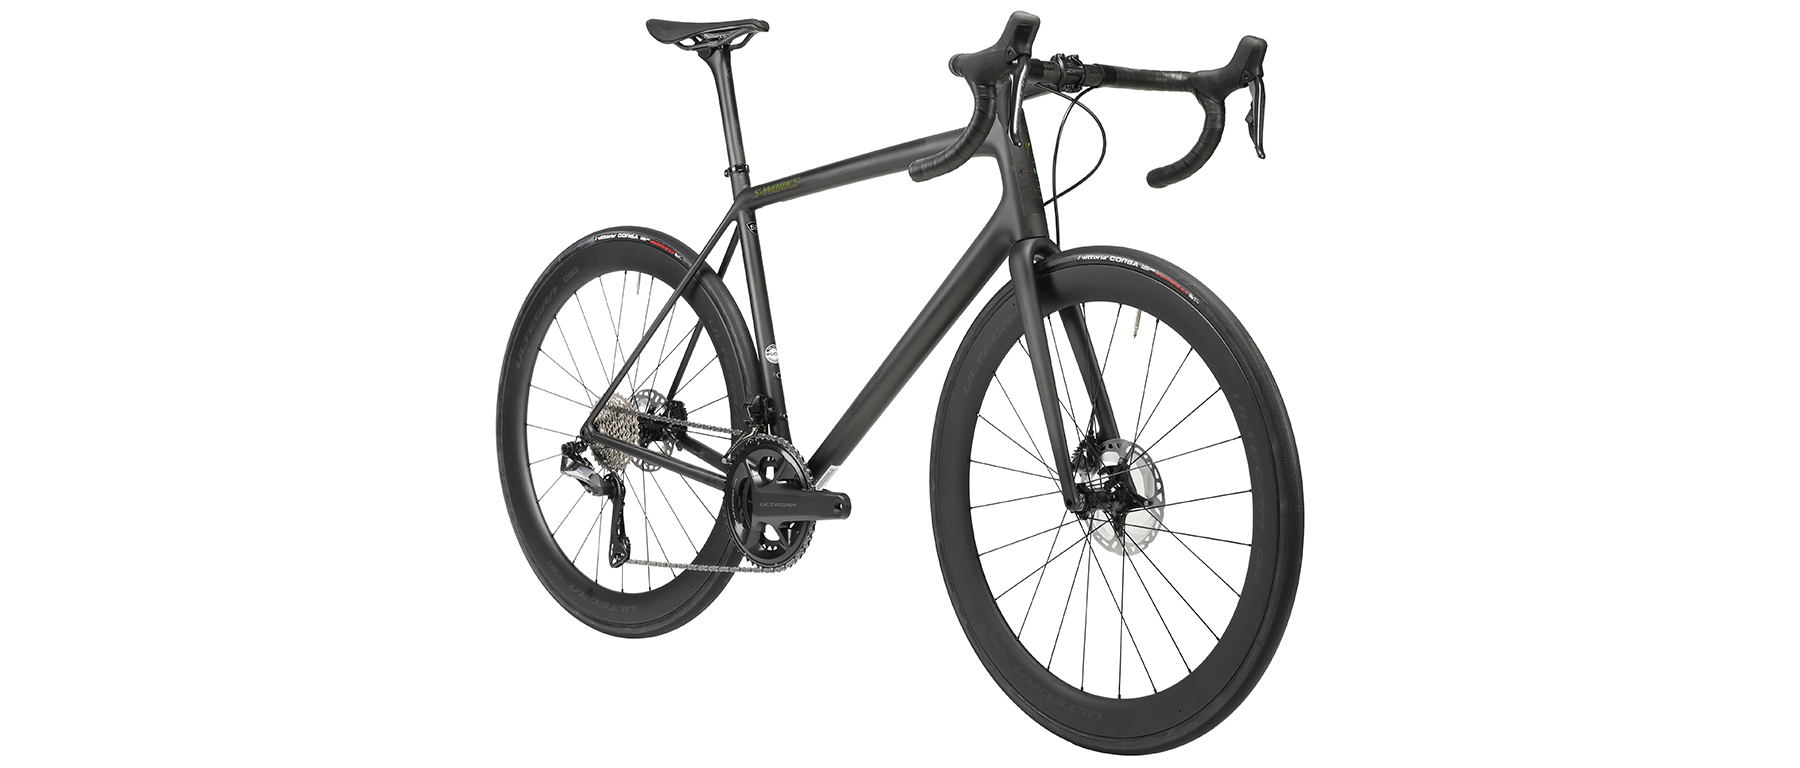 Specialized S-Works Aethos Ultegra Di2 12-Speed Bicycle